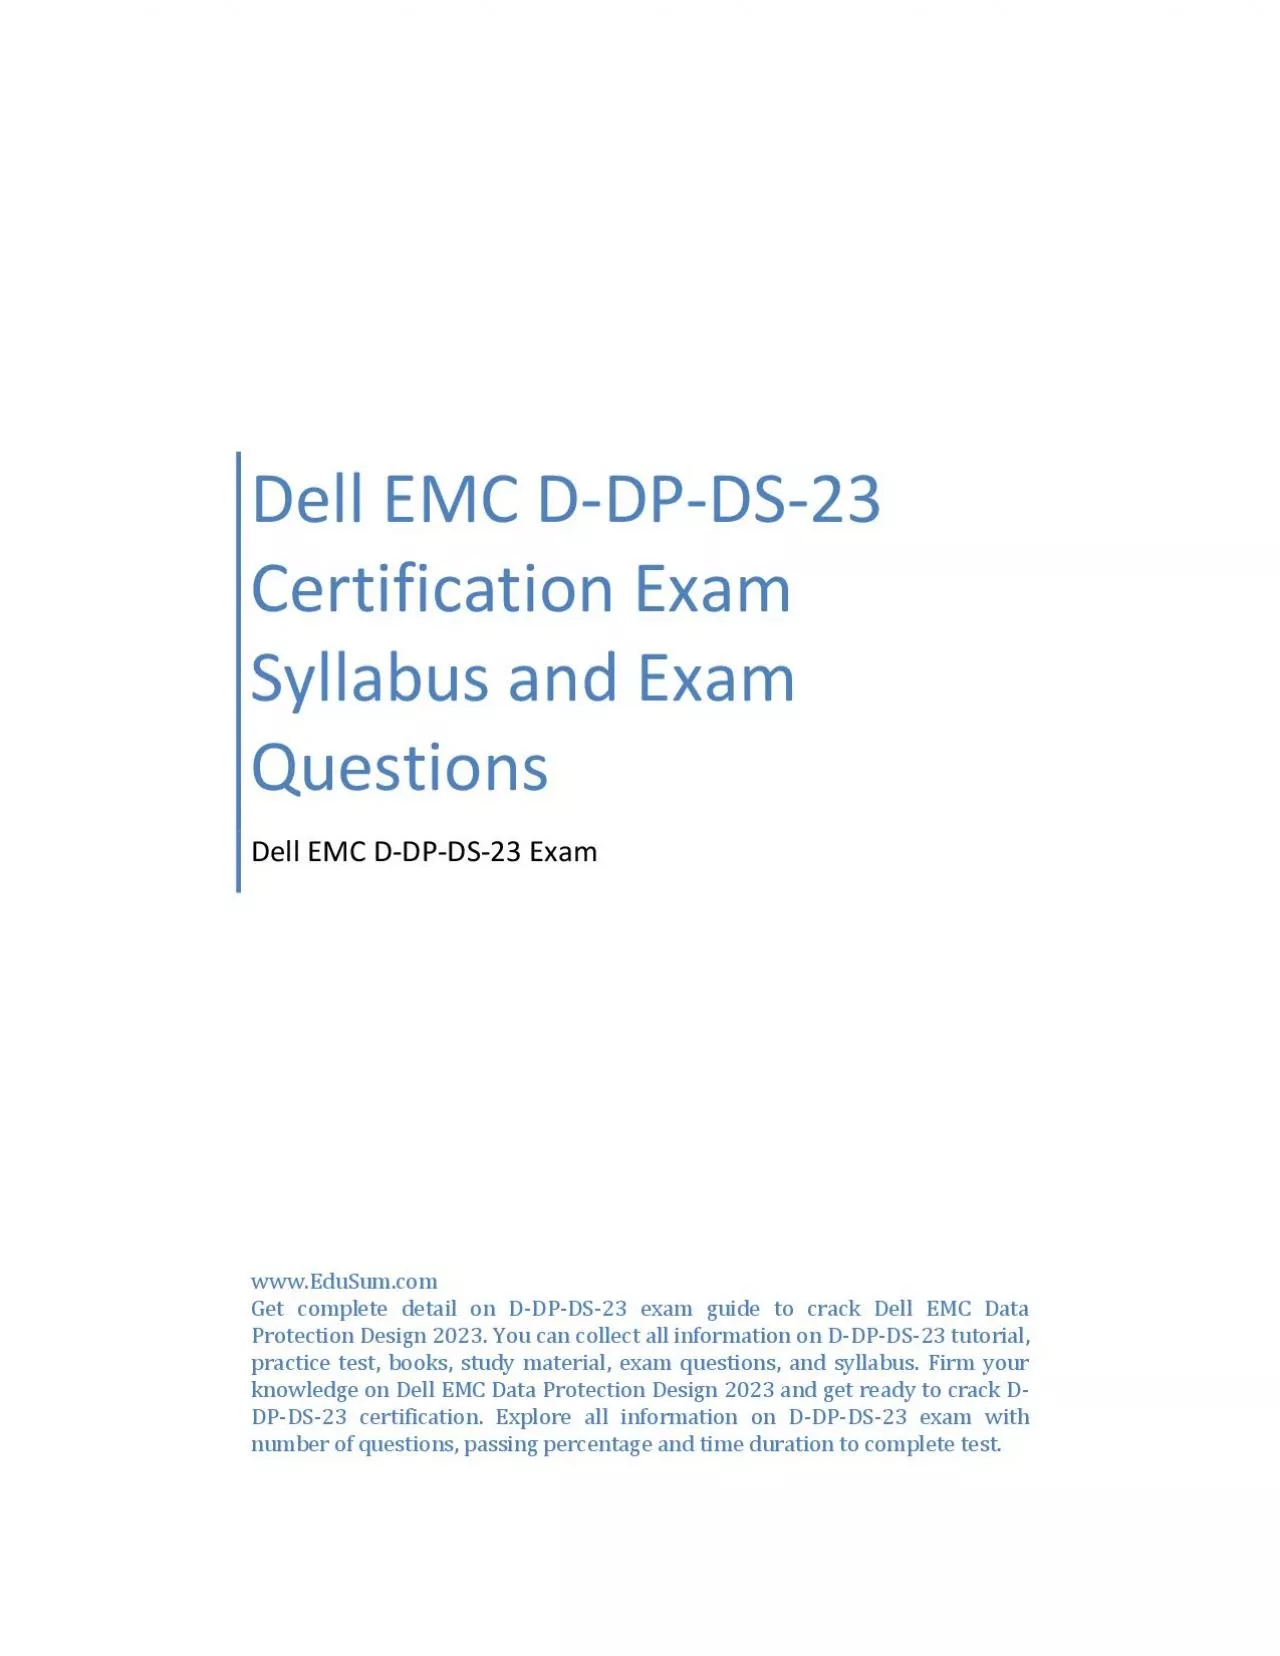 Dell EMC D-DP-DS-23 Certification Exam Syllabus and Exam Questions